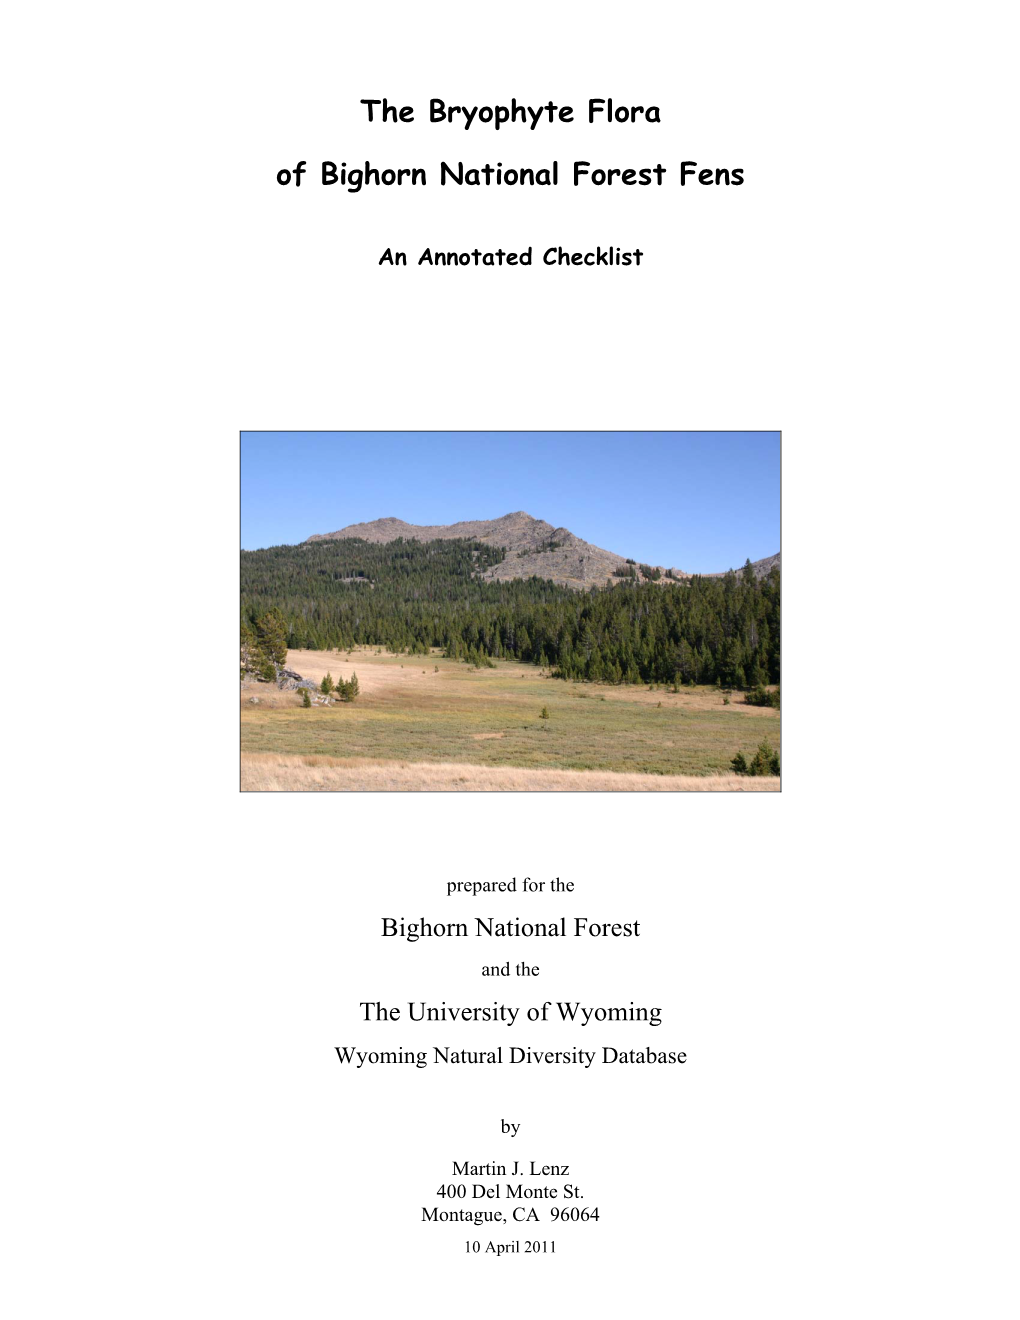 Annotated Checklist of Fen Bryophytes in the Bighorn National